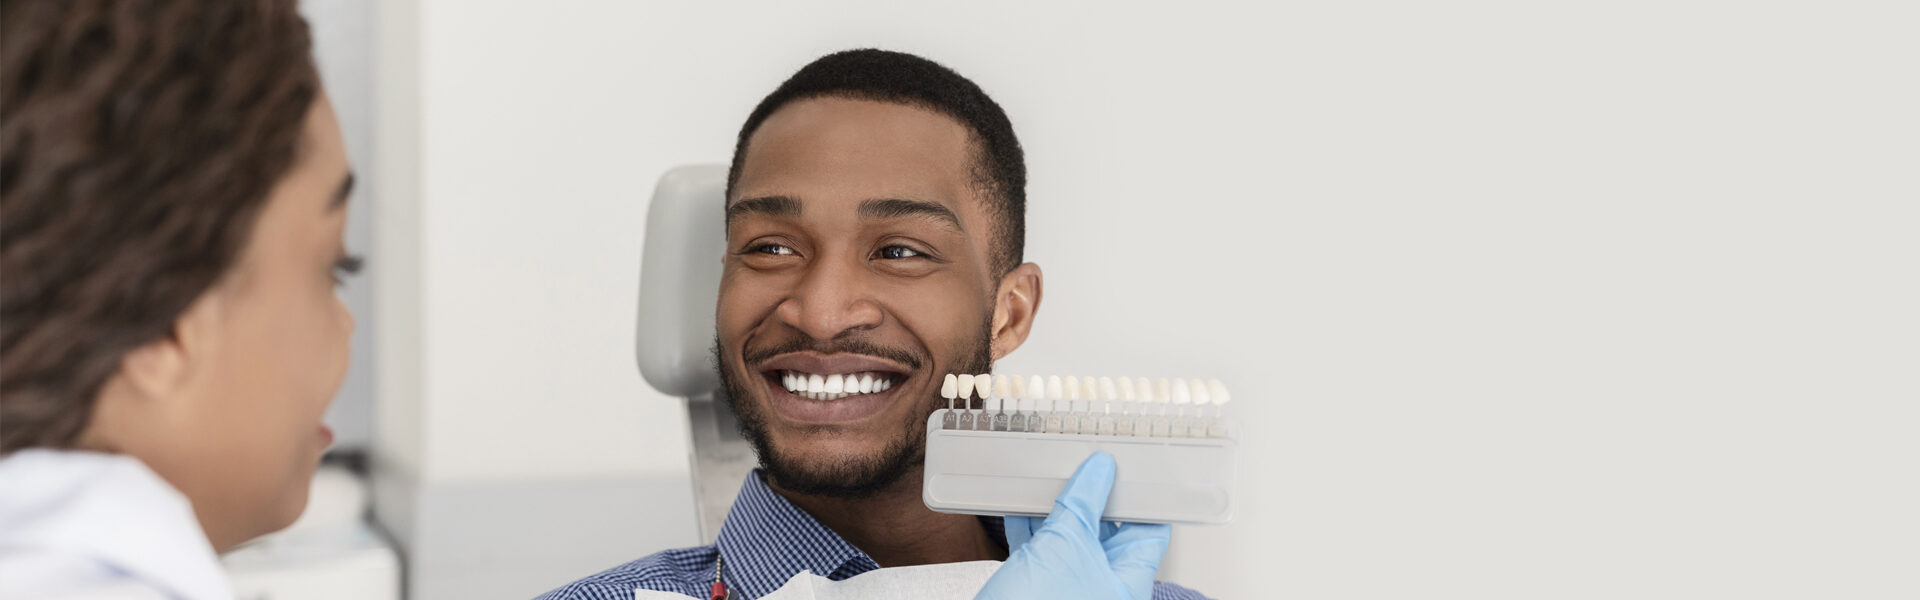 How to Boost Your Smile and Confidence With Dental Veneers?